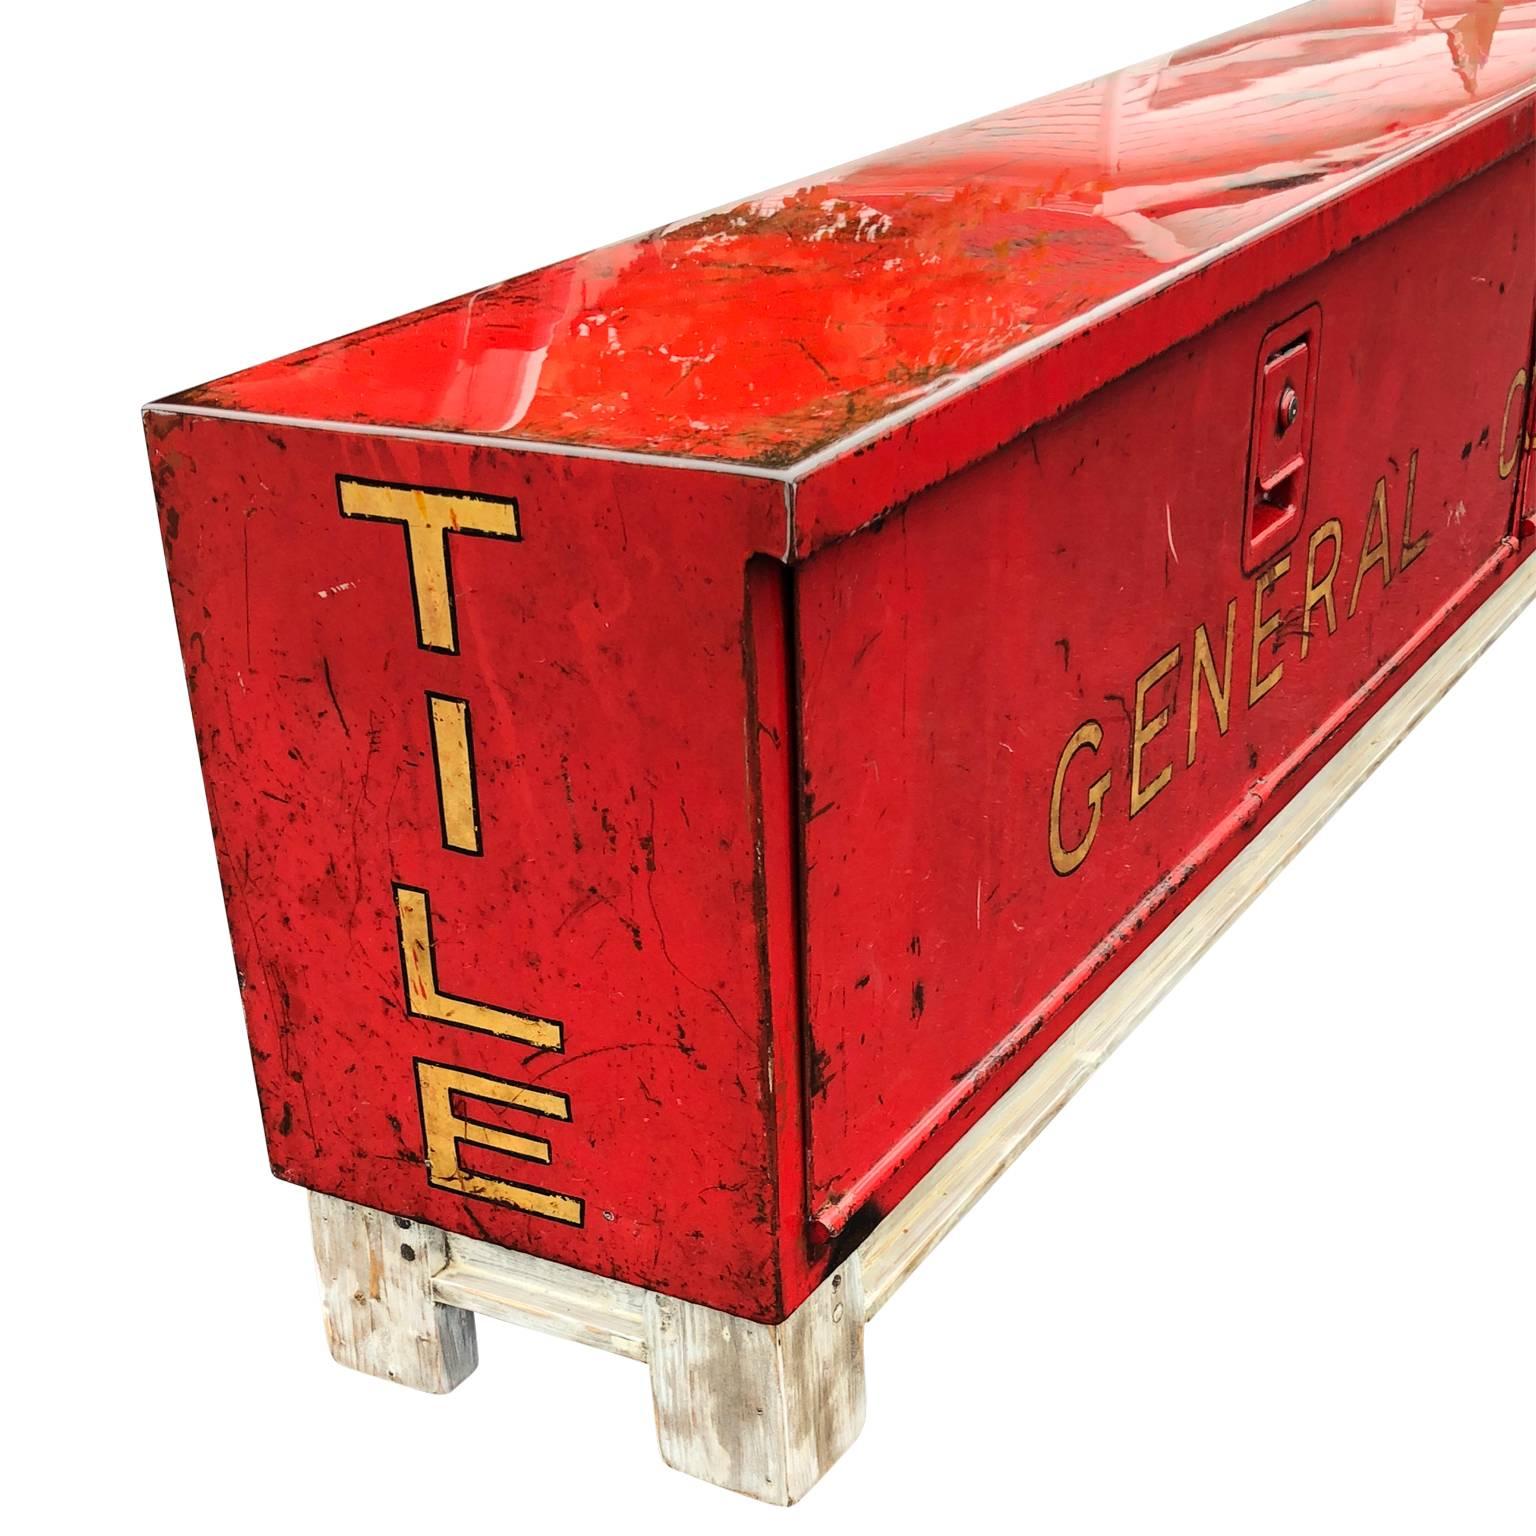 Long red and liquid-glass covered Industrial bench.

This re-purposed general construction tool box from a truck has been completed clean and covered in a thick coating of liquid glass. The wooden base is custom-made and makes this box into a